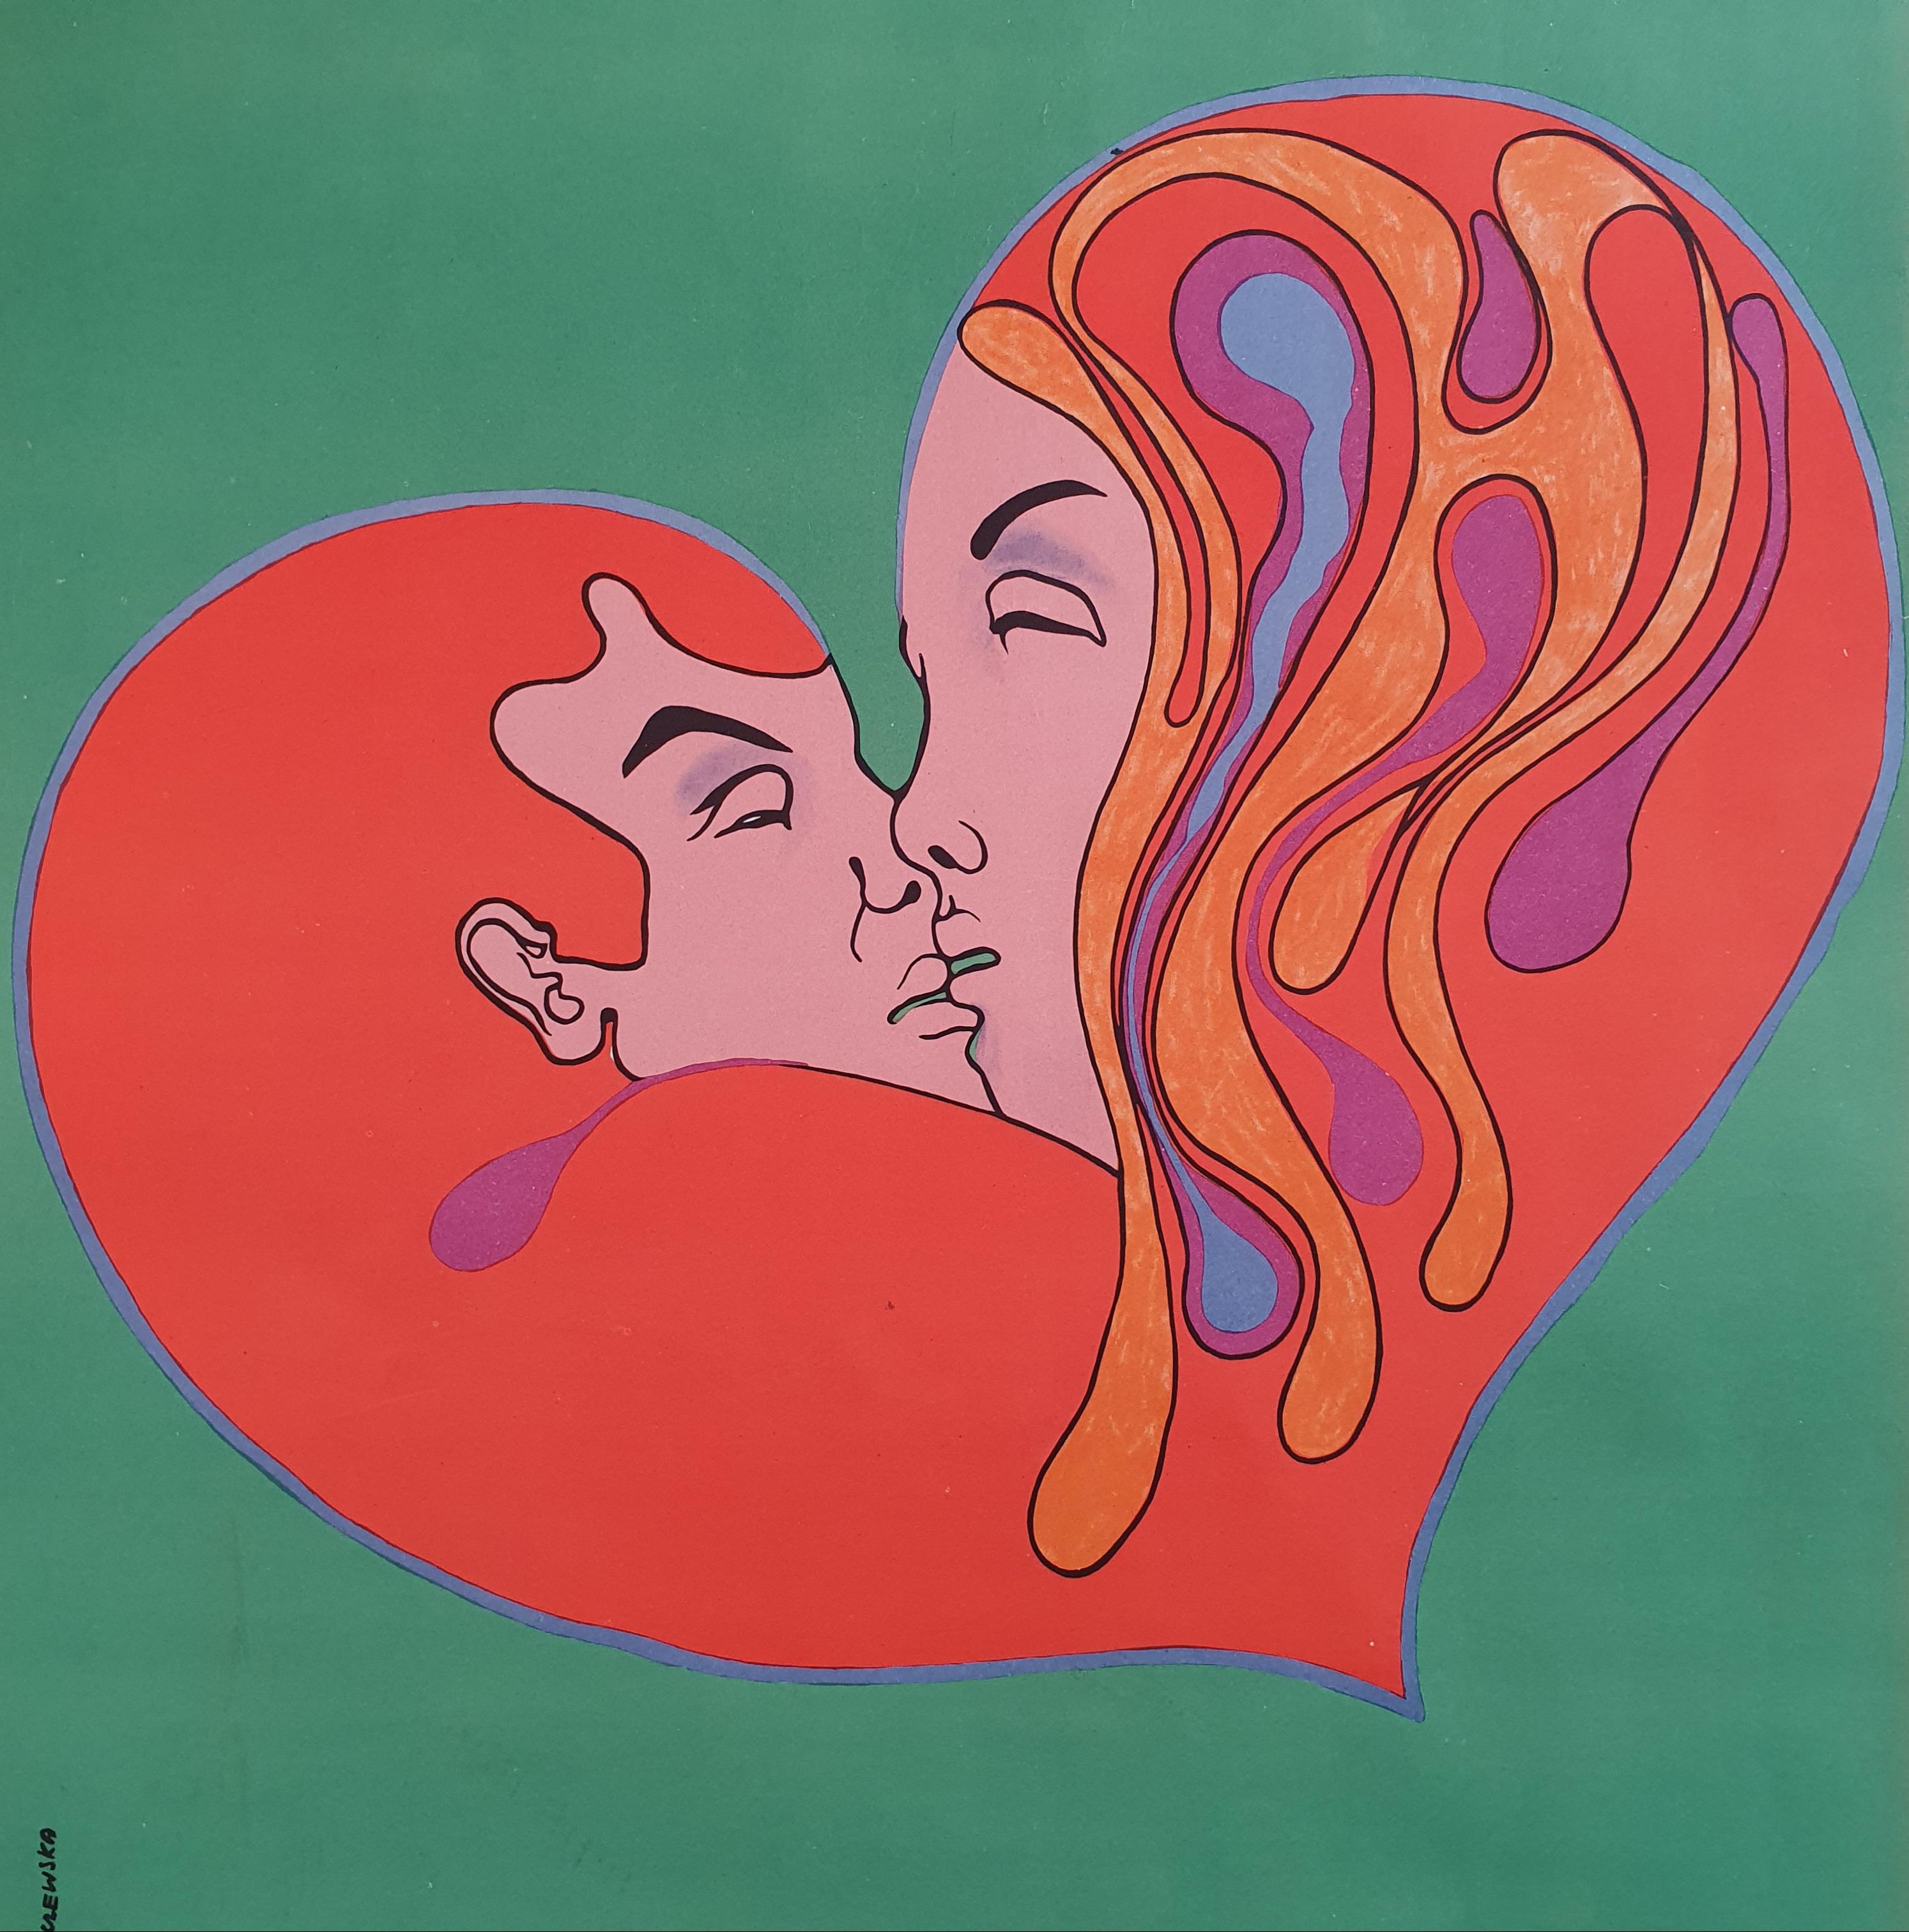 Original vintage Polish movie poster, for the Italian-French Grand Prix-winning movie: Signore e Signori (In english: ´The birds, the bees and the Italians´). Portraying a kissing couple on a green background drawn by Jolanta Karulewska and the film